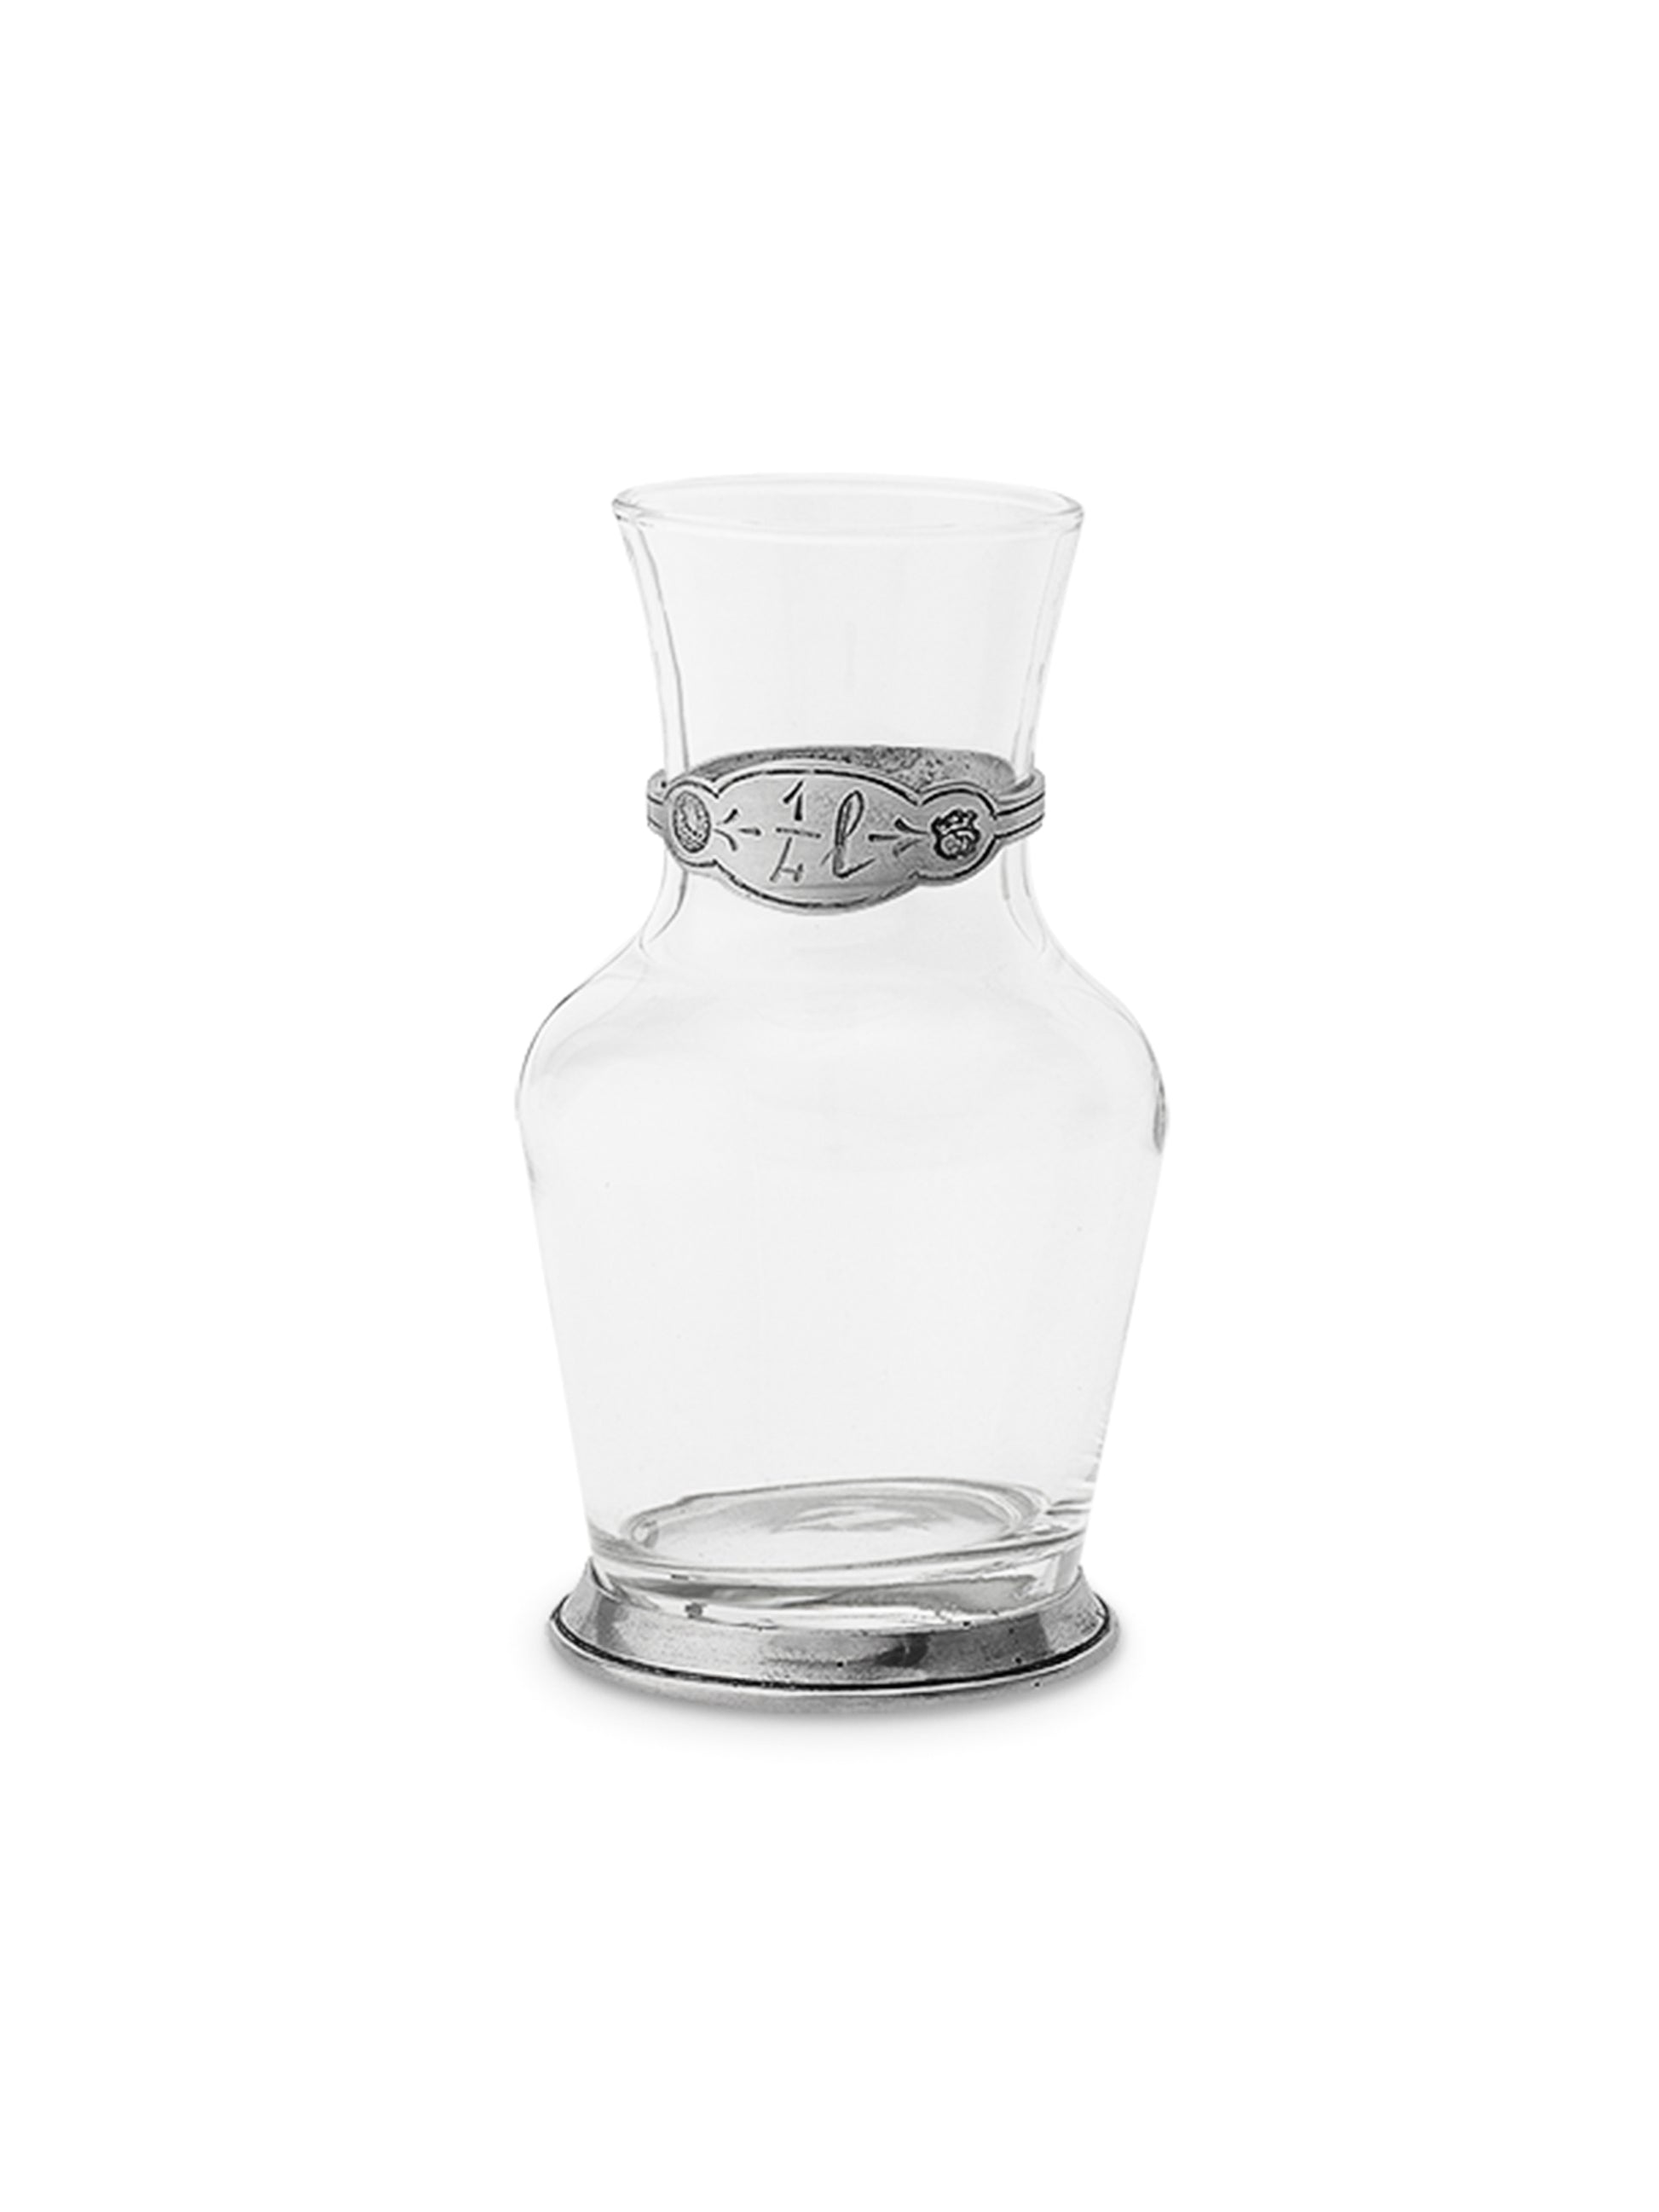 MATCH Pewter Glass Carafe 1/4L Weston Table